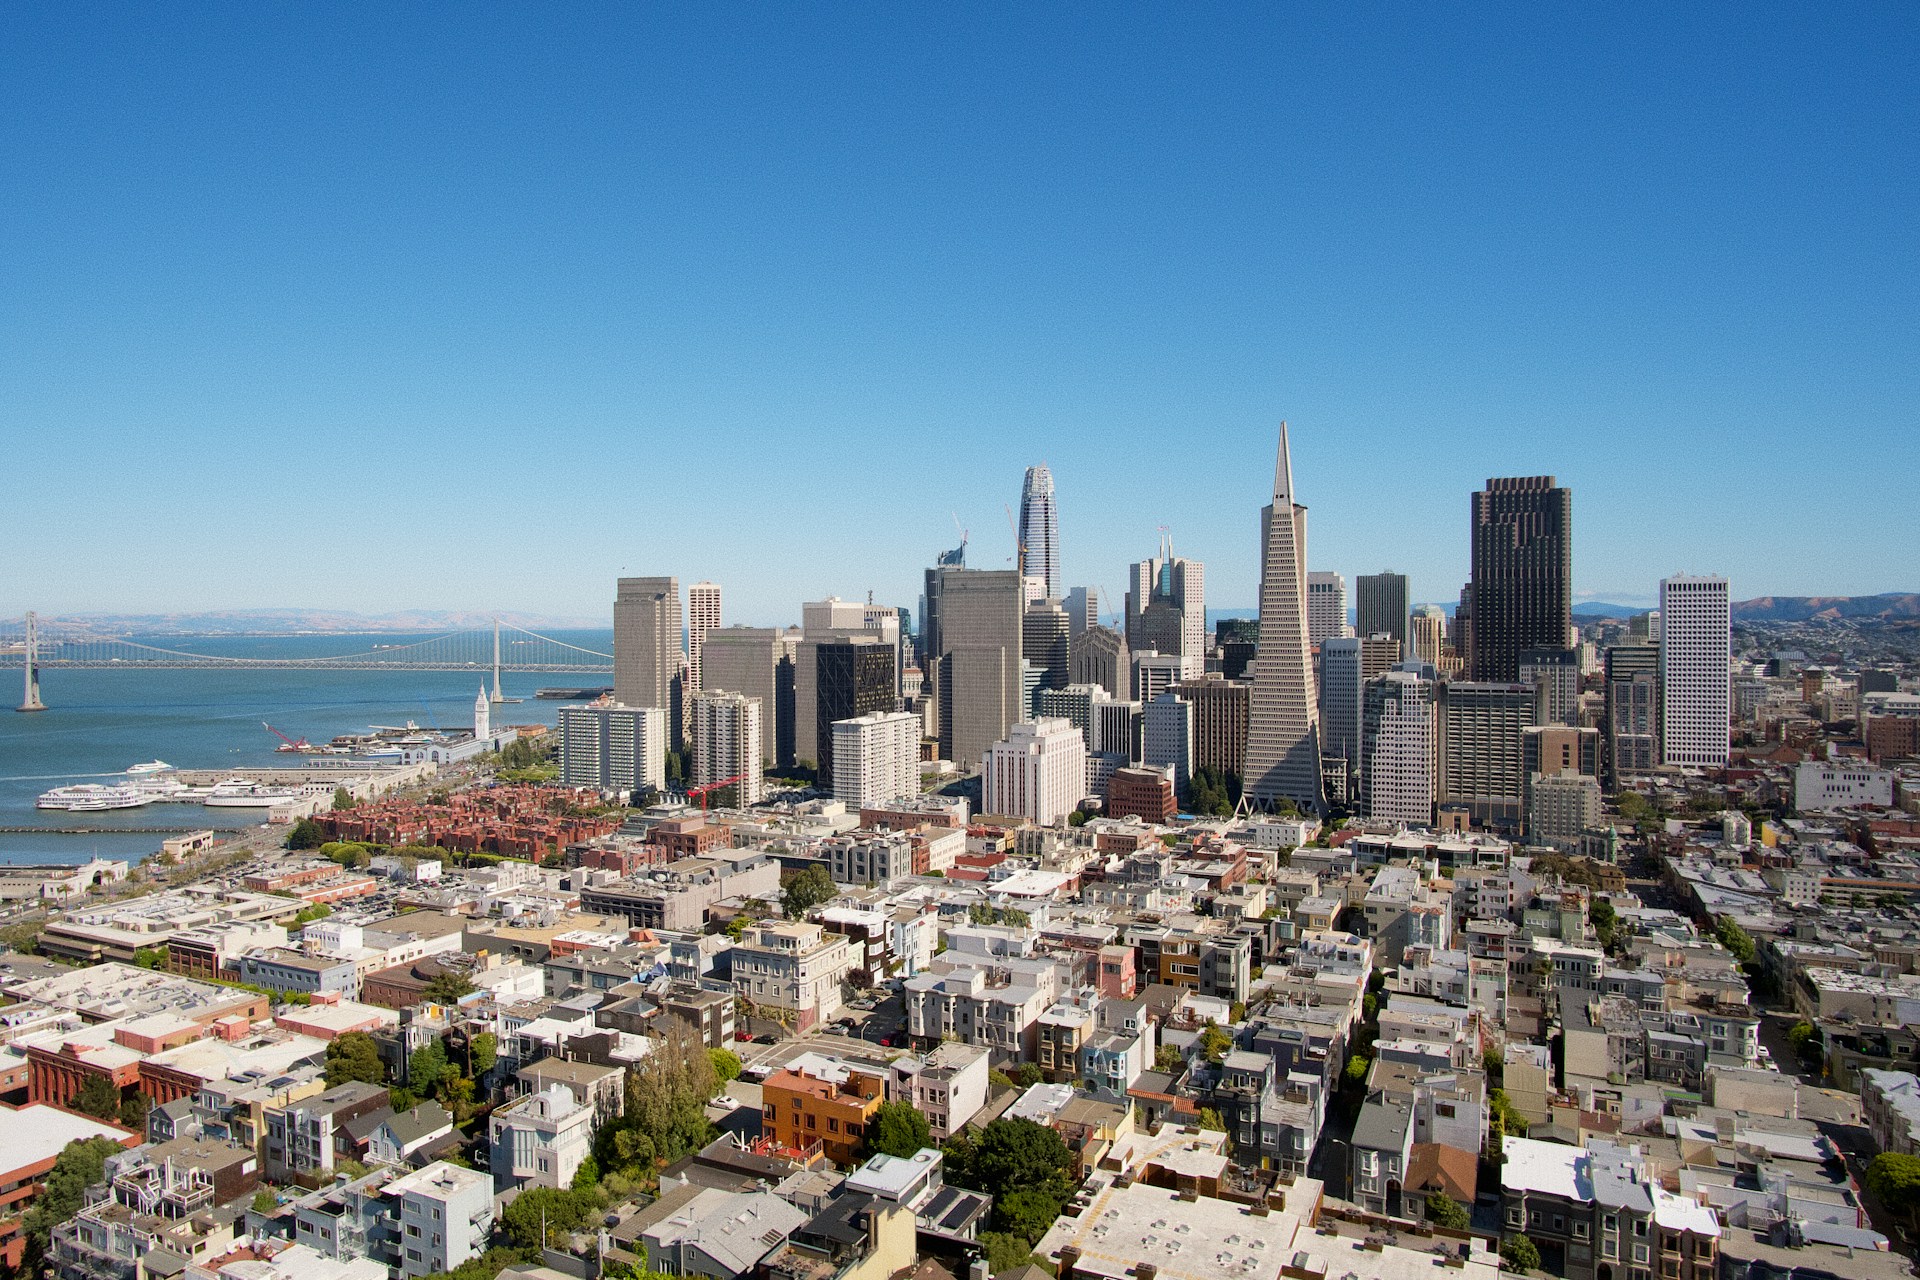 San Francisco is a popular choice for people relocating to the U.S. (photo: Shen Pan)